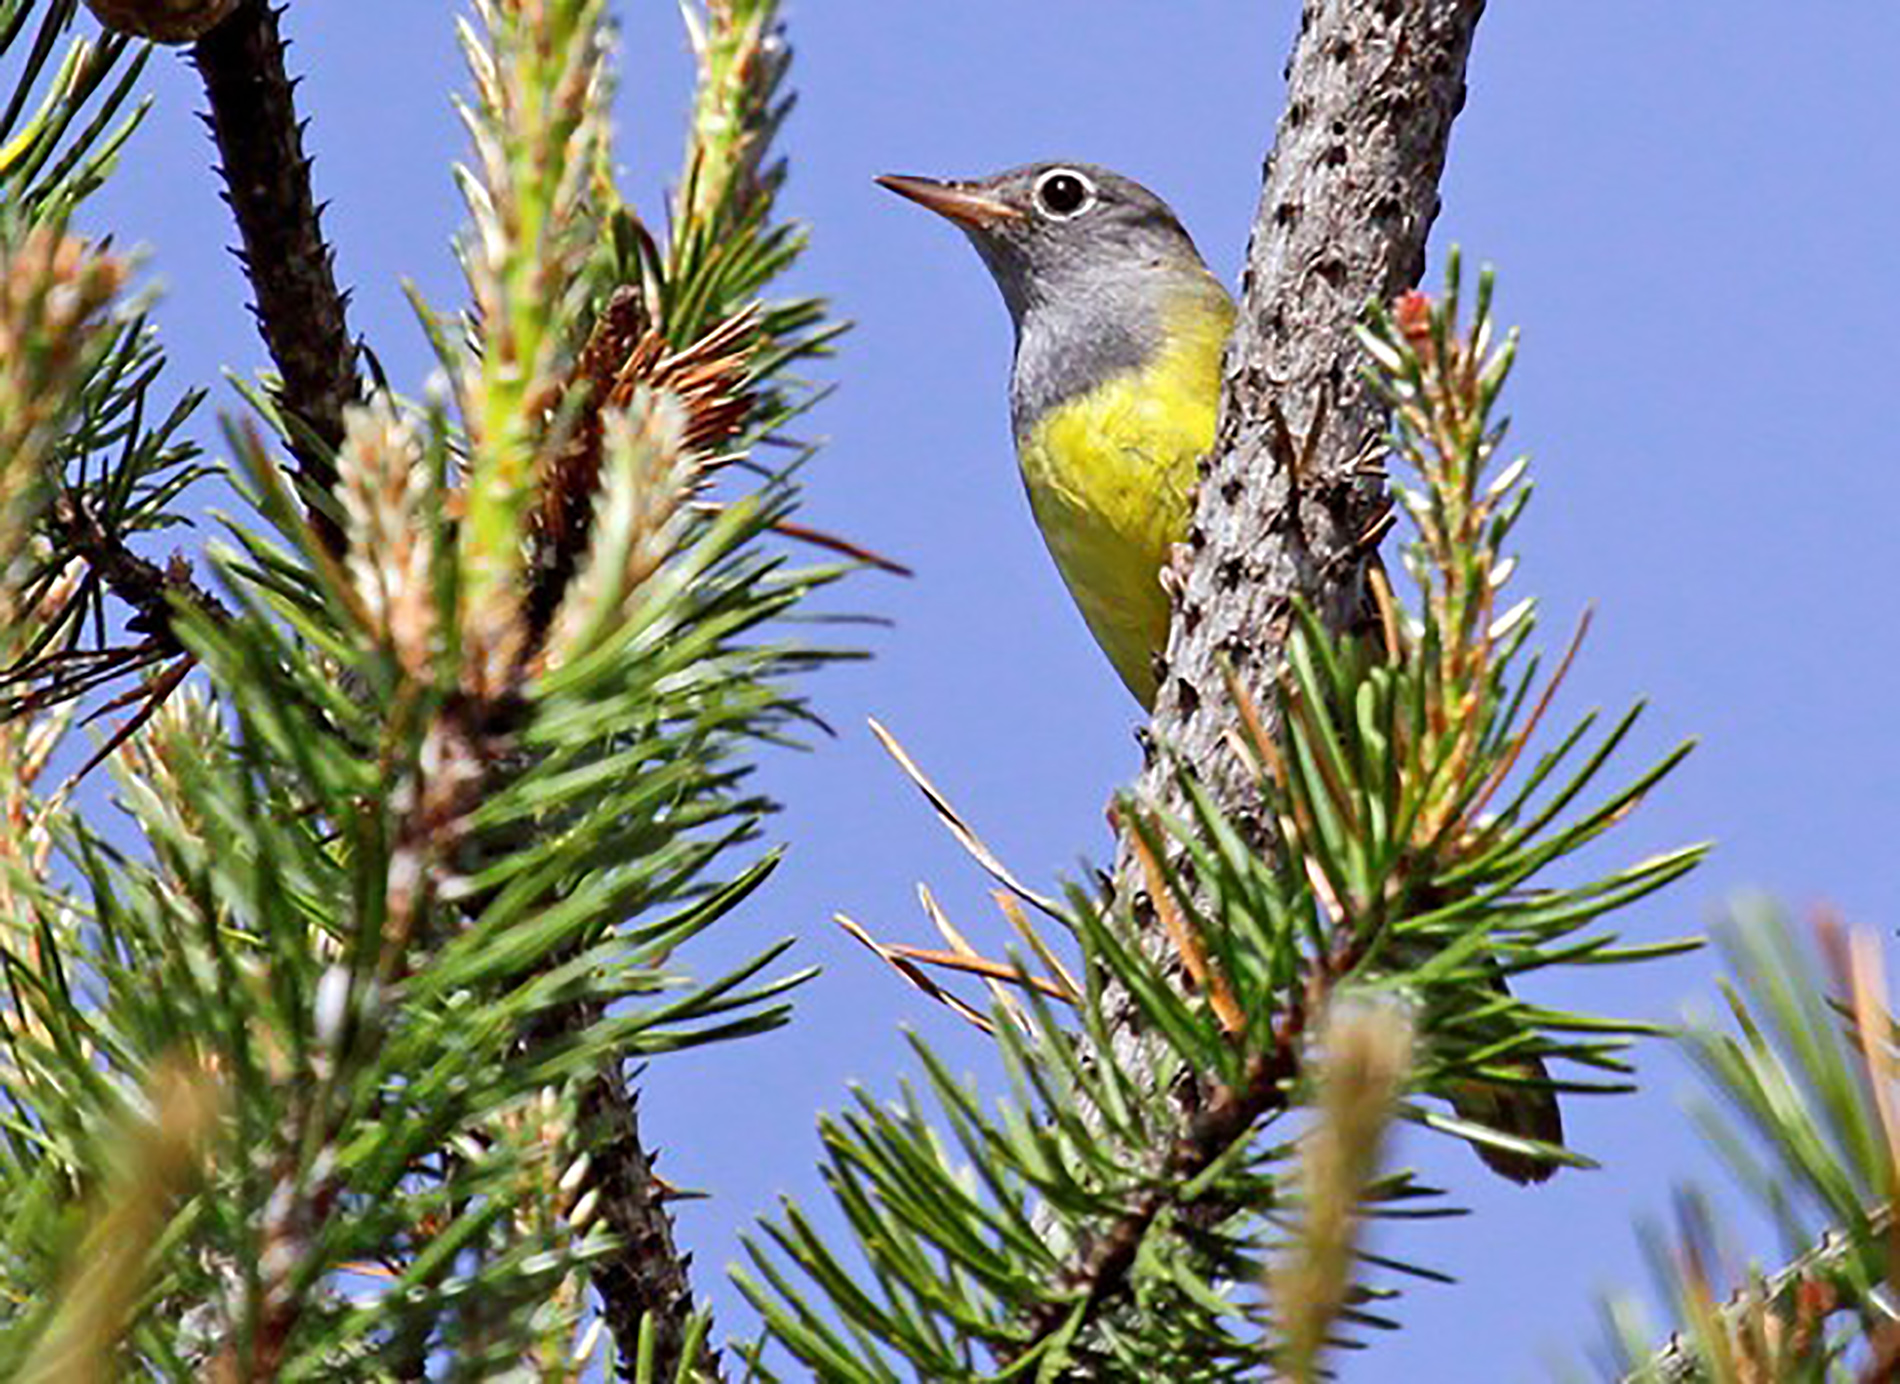 As deforestation threatens the songbird, Wisconsin works with partners to stave off further decline